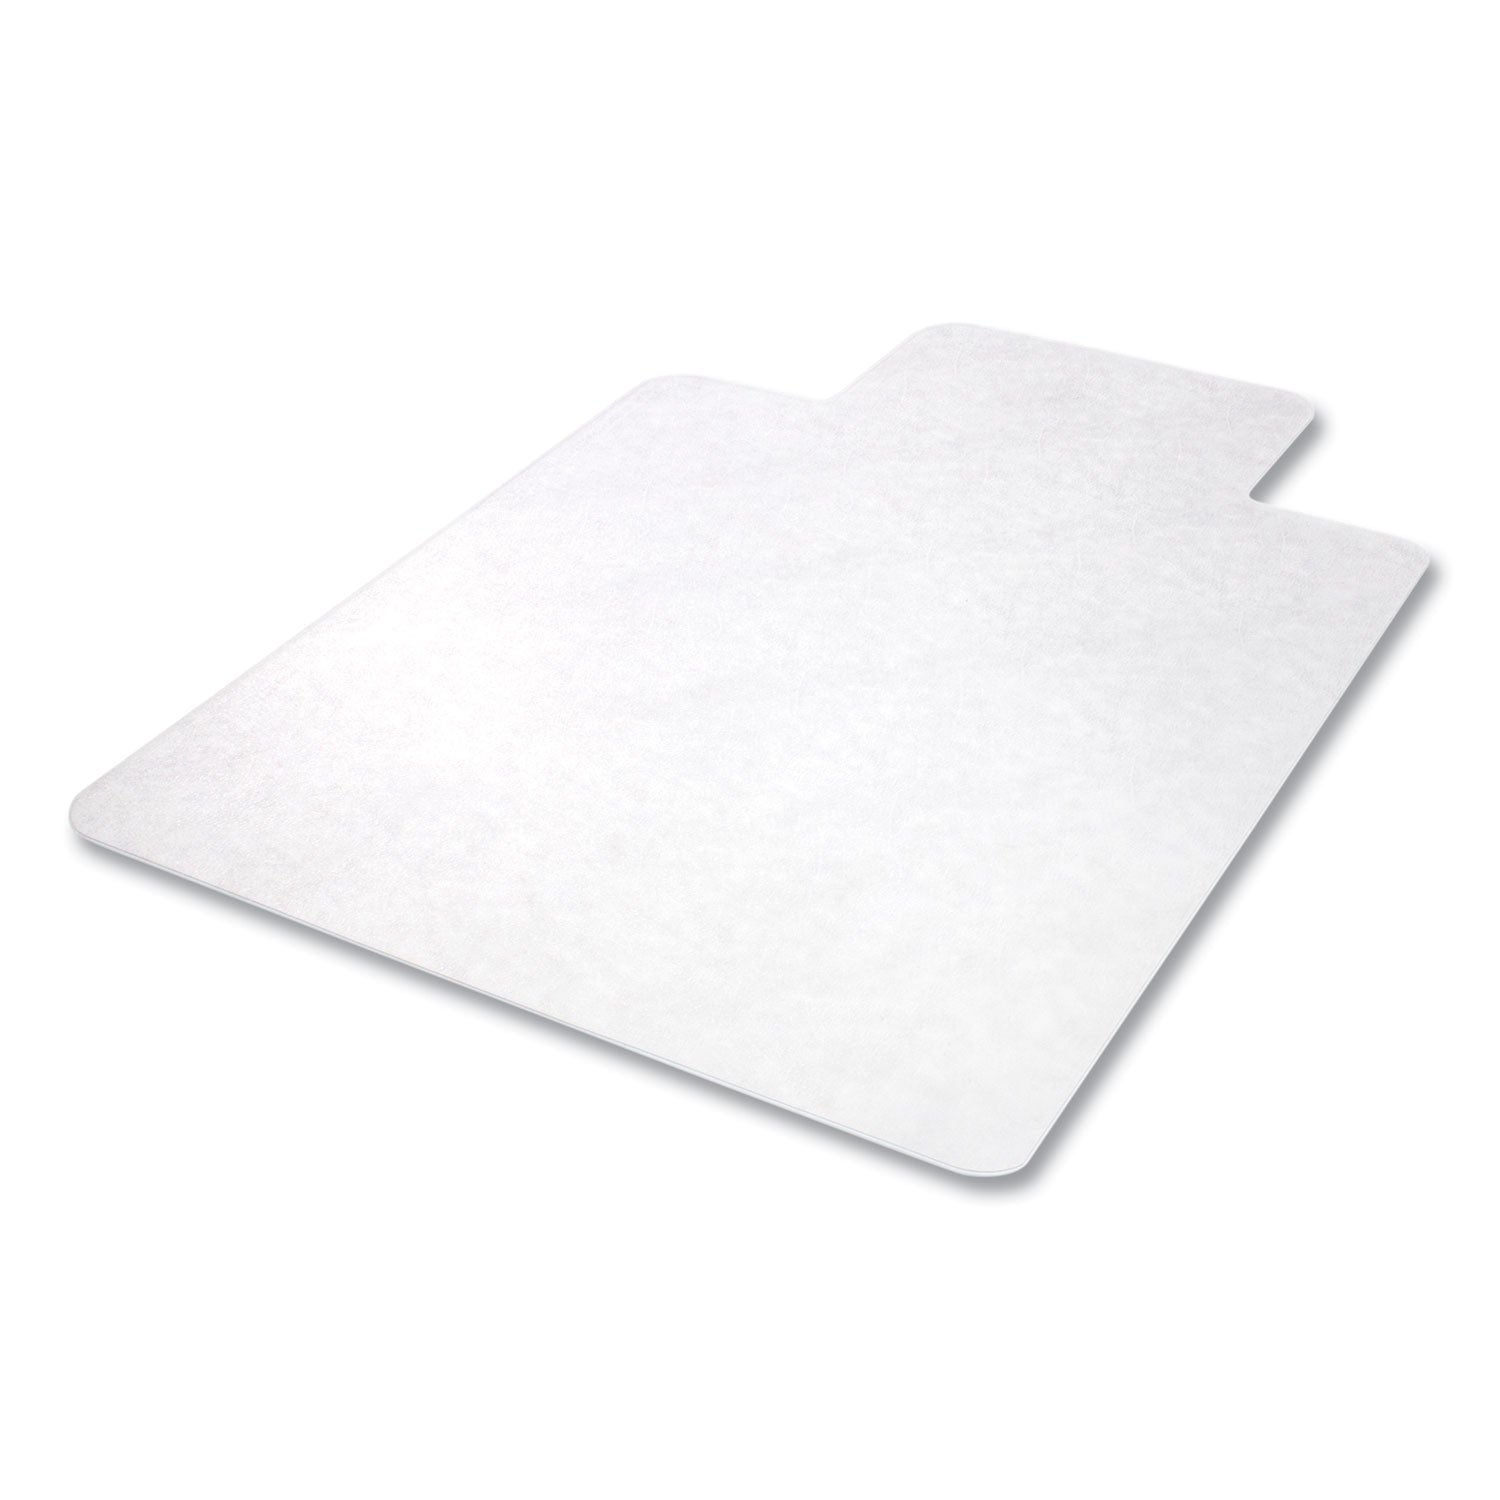 economat-antimicrobial-chair-mat-lipped-36-x-48-clear-ships-in-4-6-business-days_defcm2e112amcom - 5